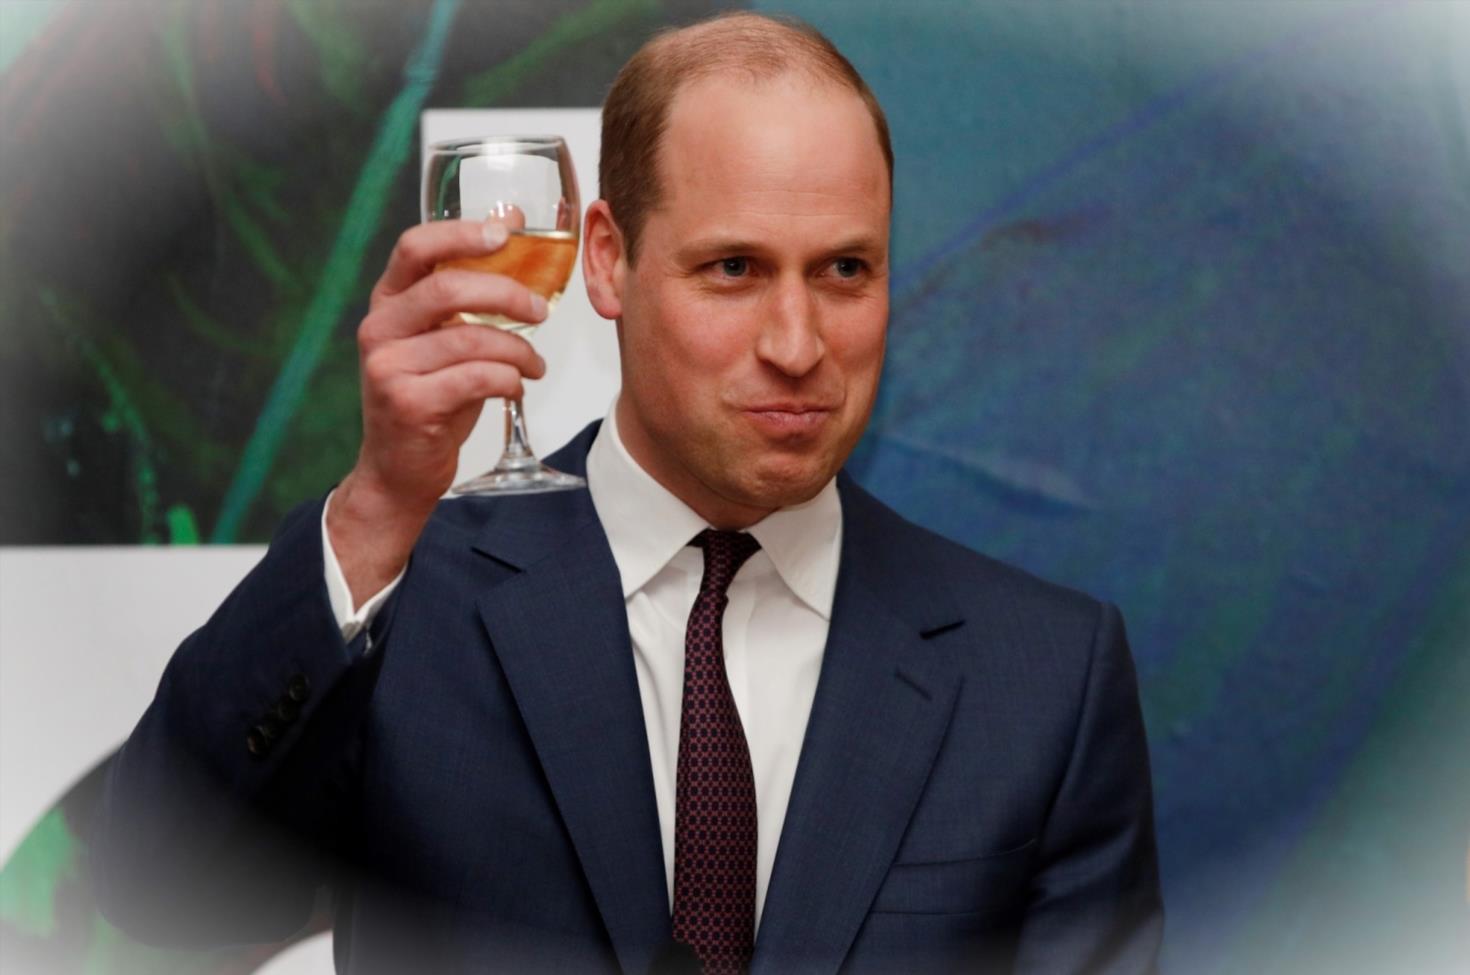 Prince William to Star in ITV Documentary on Homelessness Project2bsoHrN 1